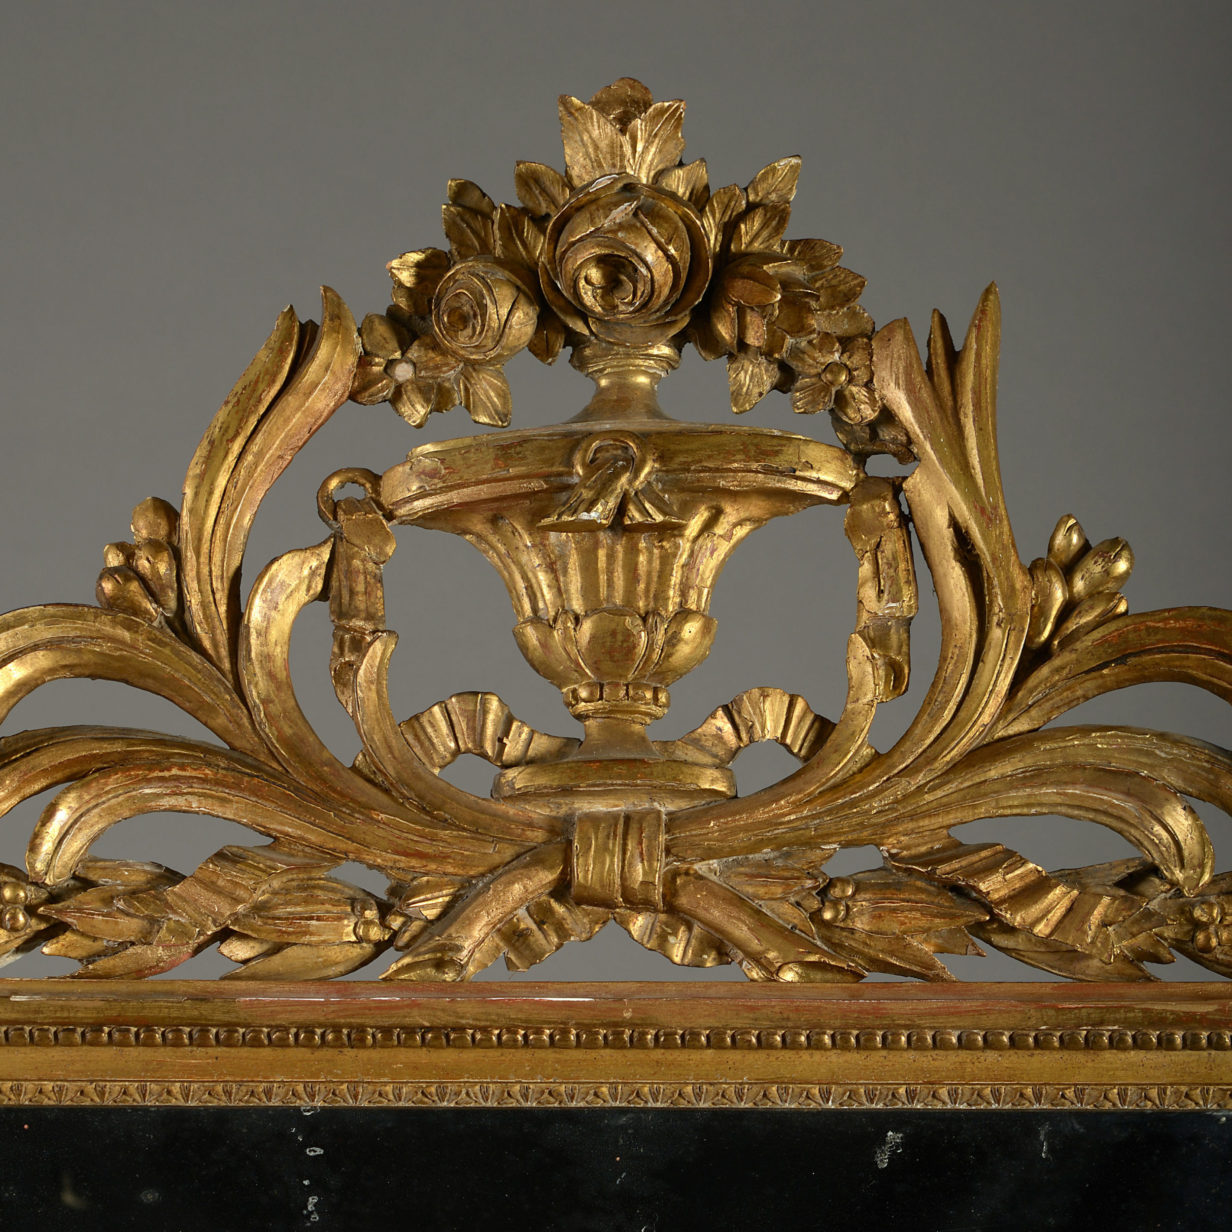 A large late 18th century louis xvi period giltwood mirror